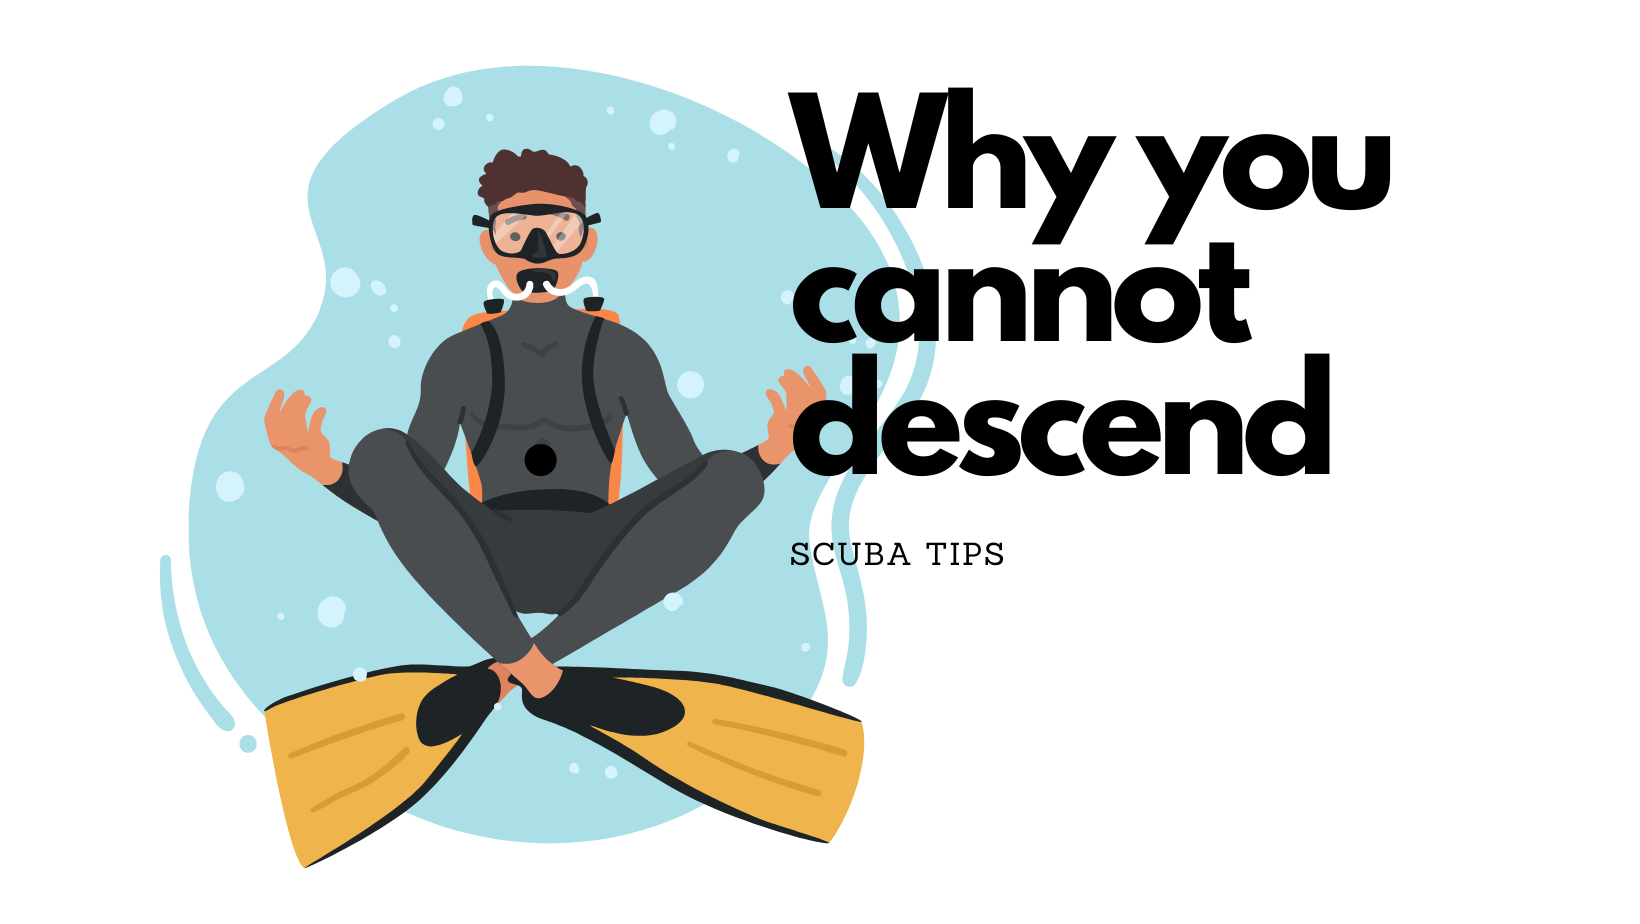 How to descend in scuba diving the right way